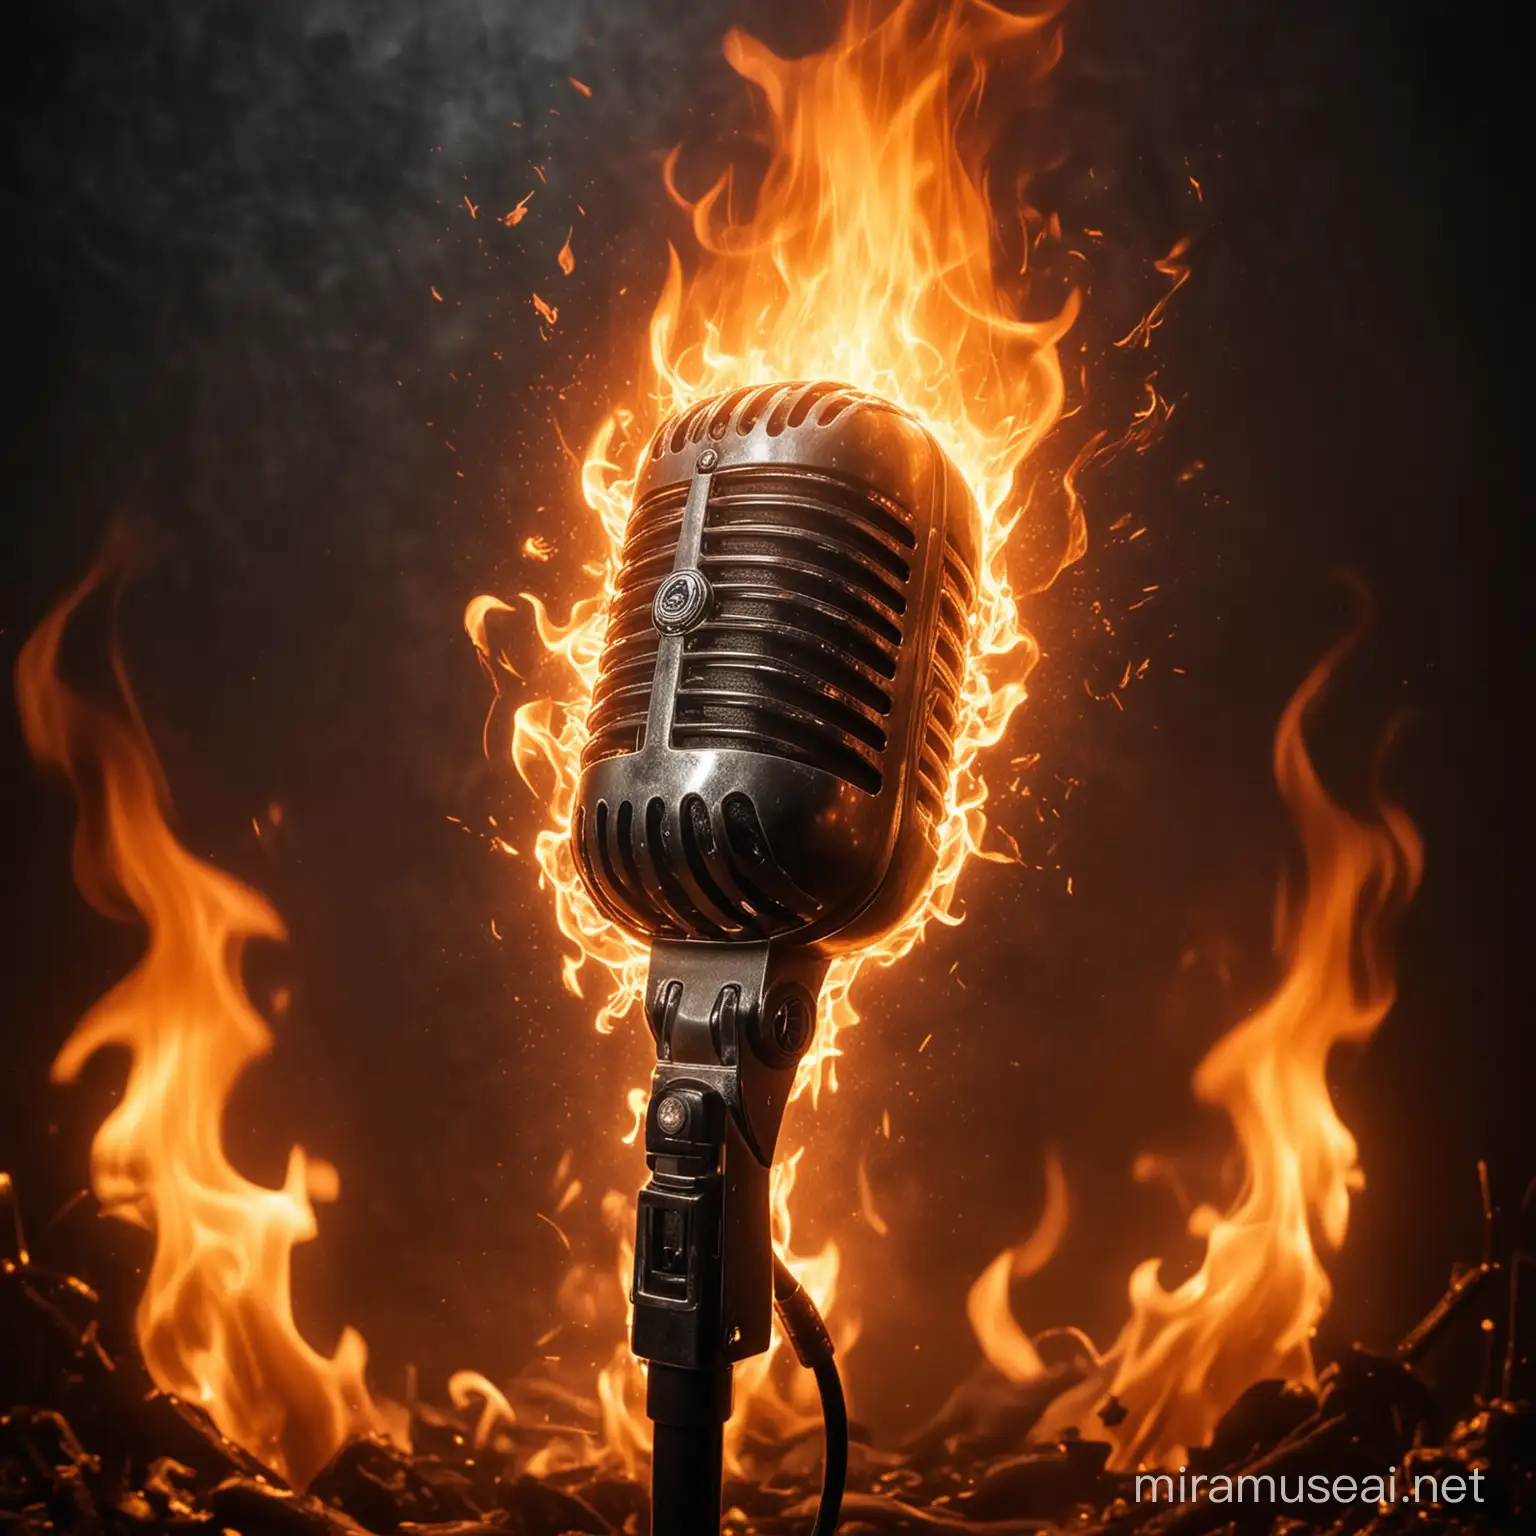 Old school mic engulfed in a body of flames 